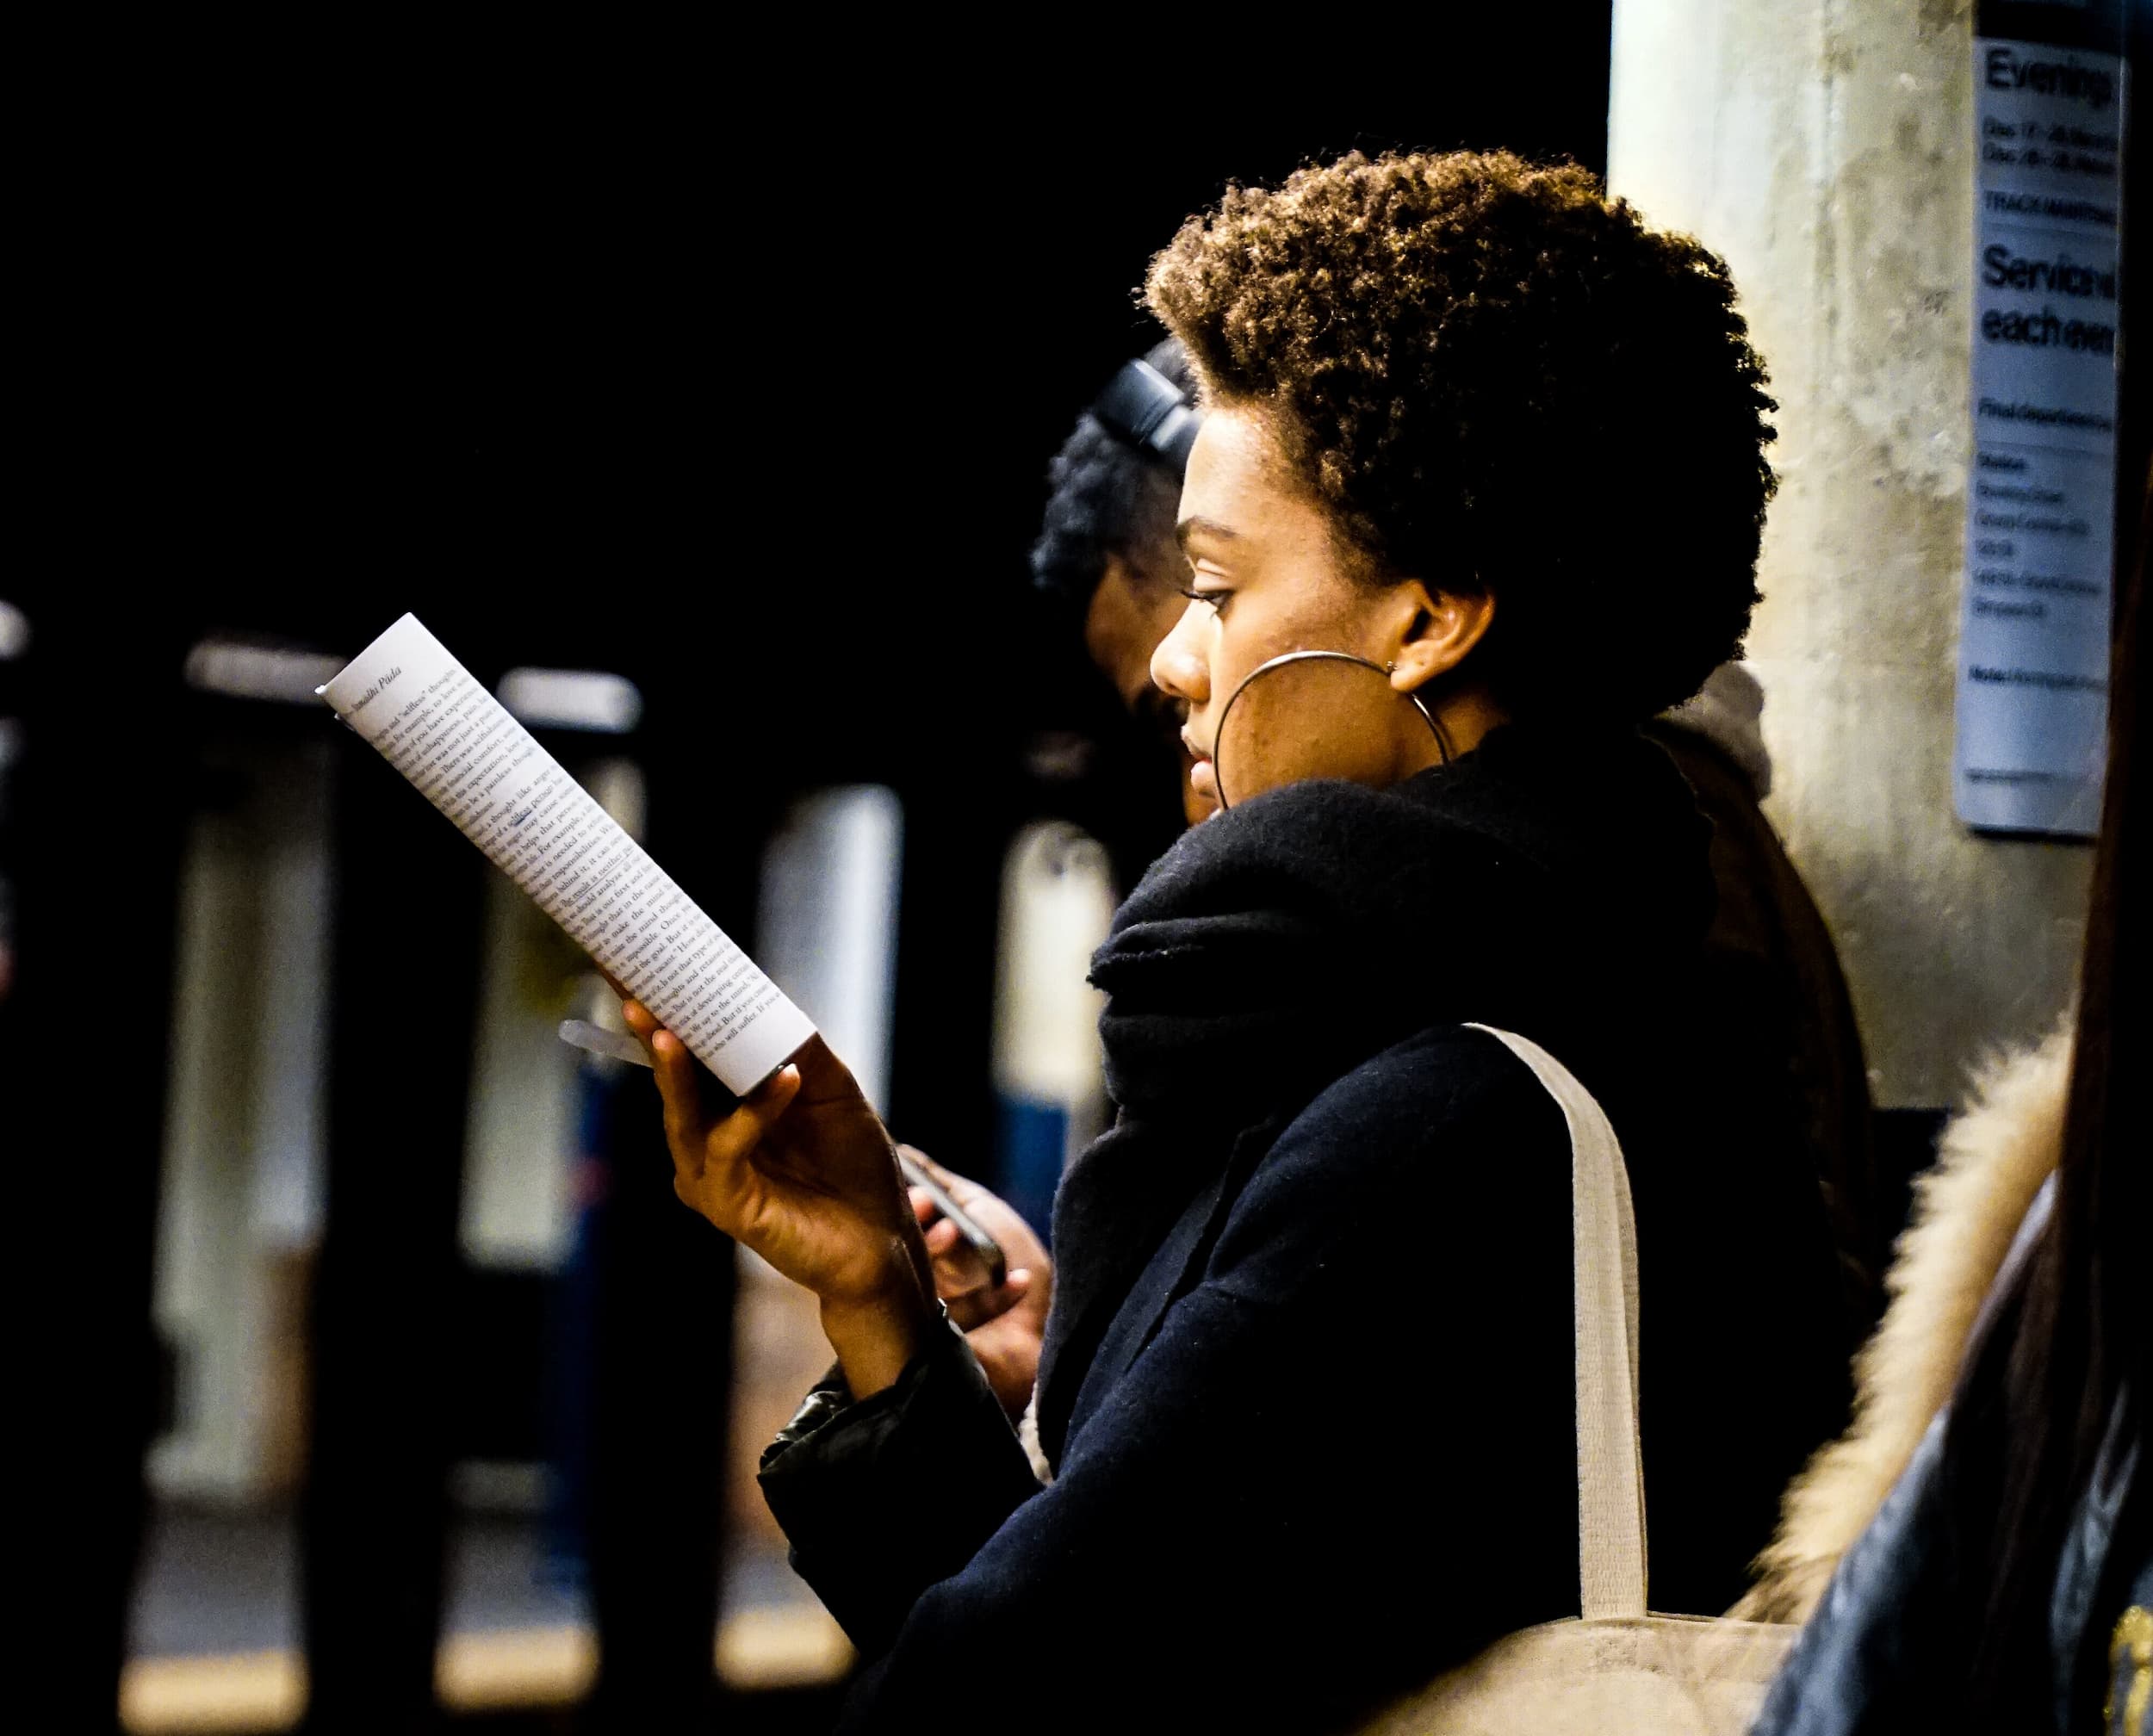 Woman reading a book waiting for public transit